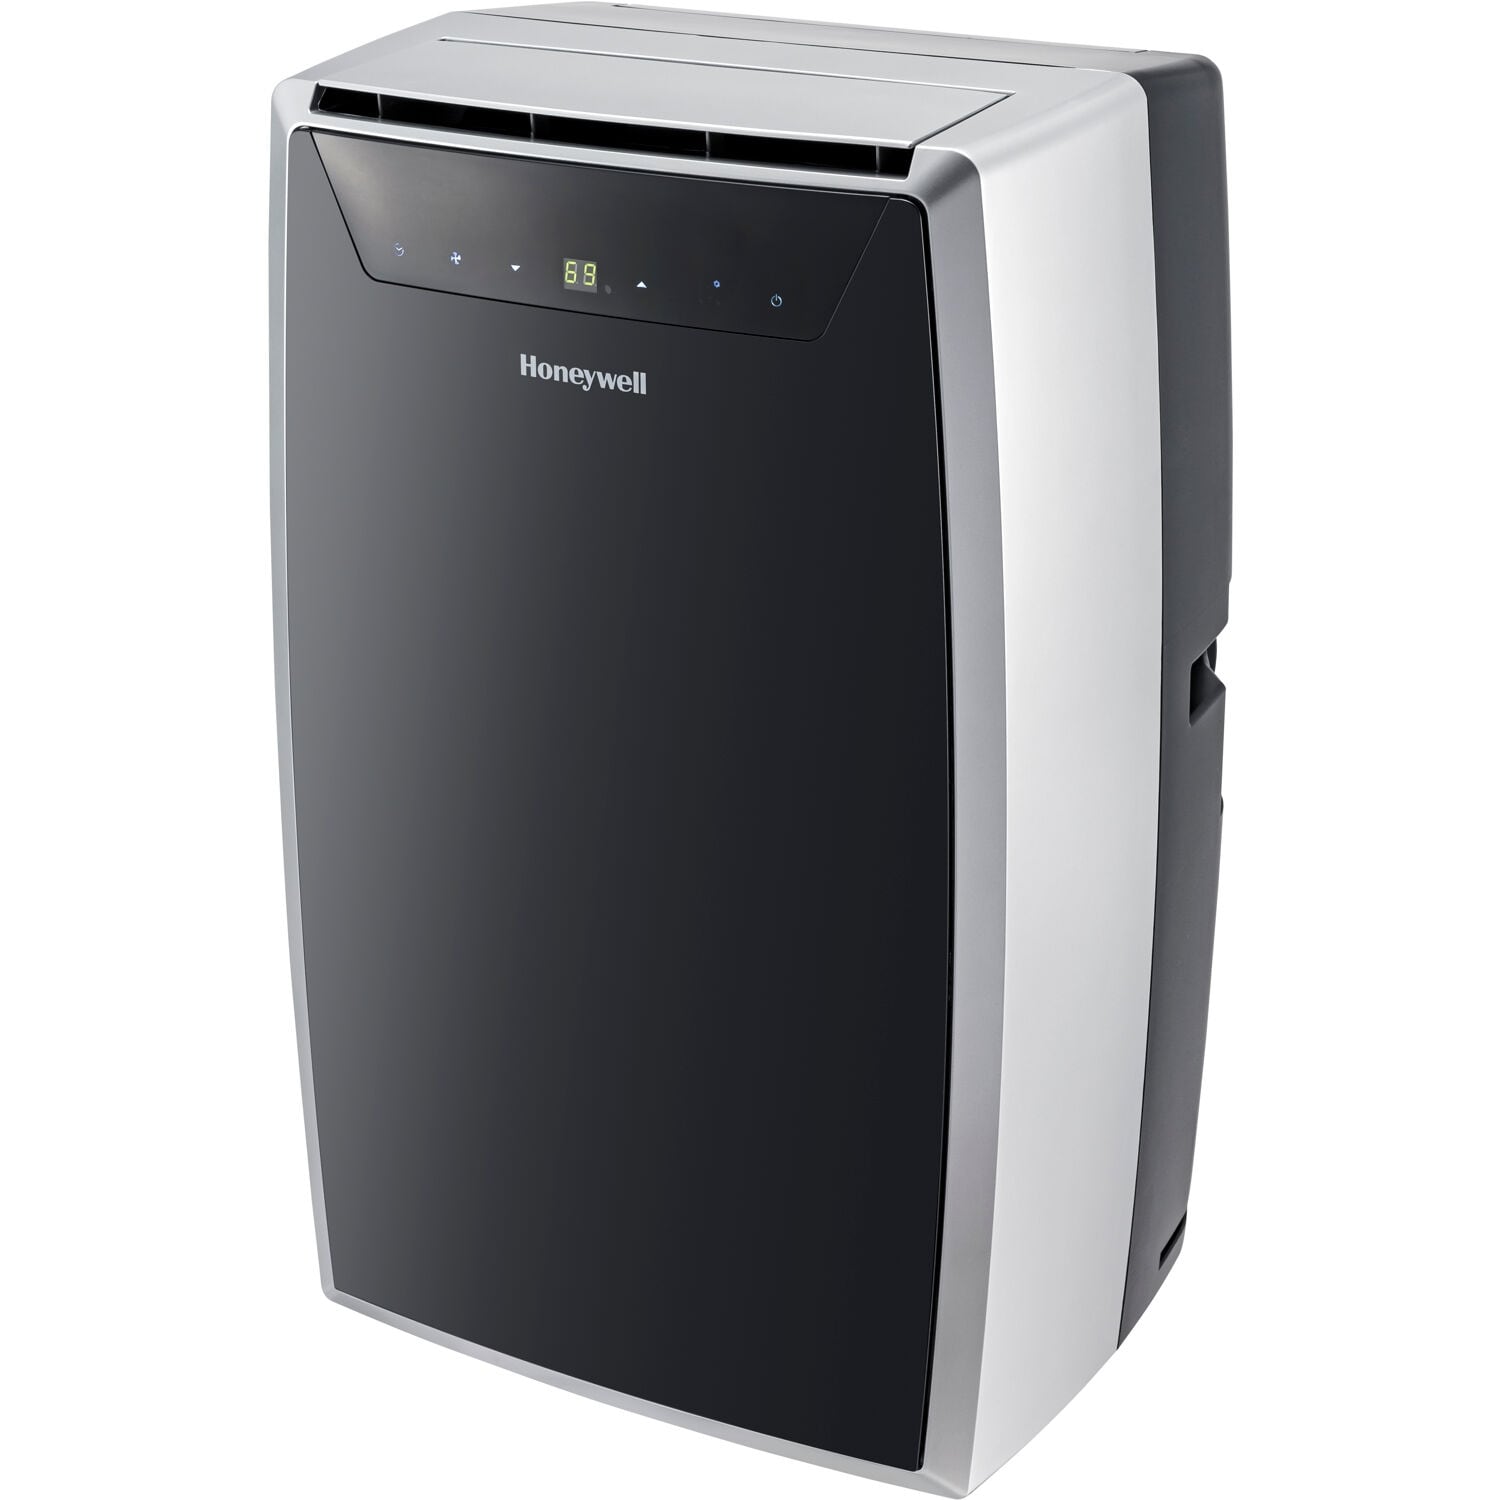 RCA 8,000 BTU WiFi Enabled Portable Air Conditioner with Remote